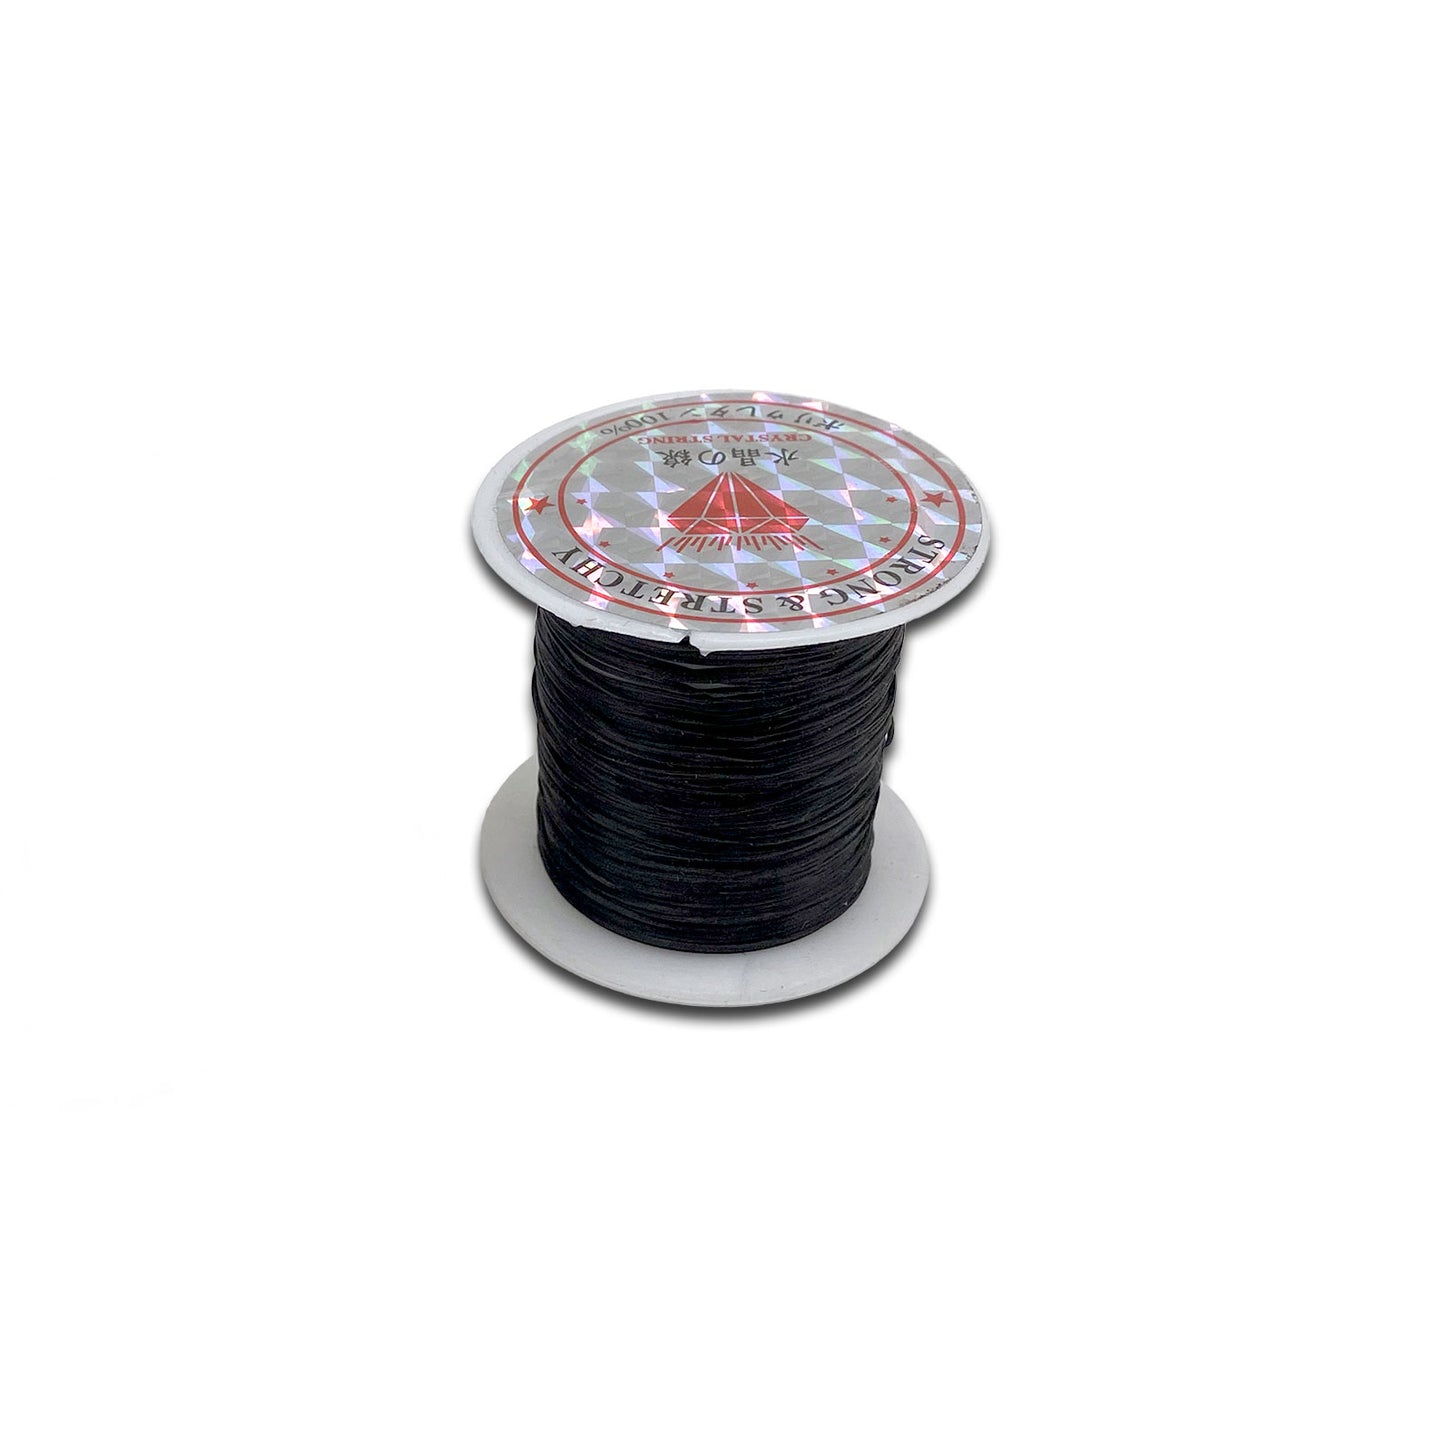 24 Pack of .6mm Thick Black Elastic String